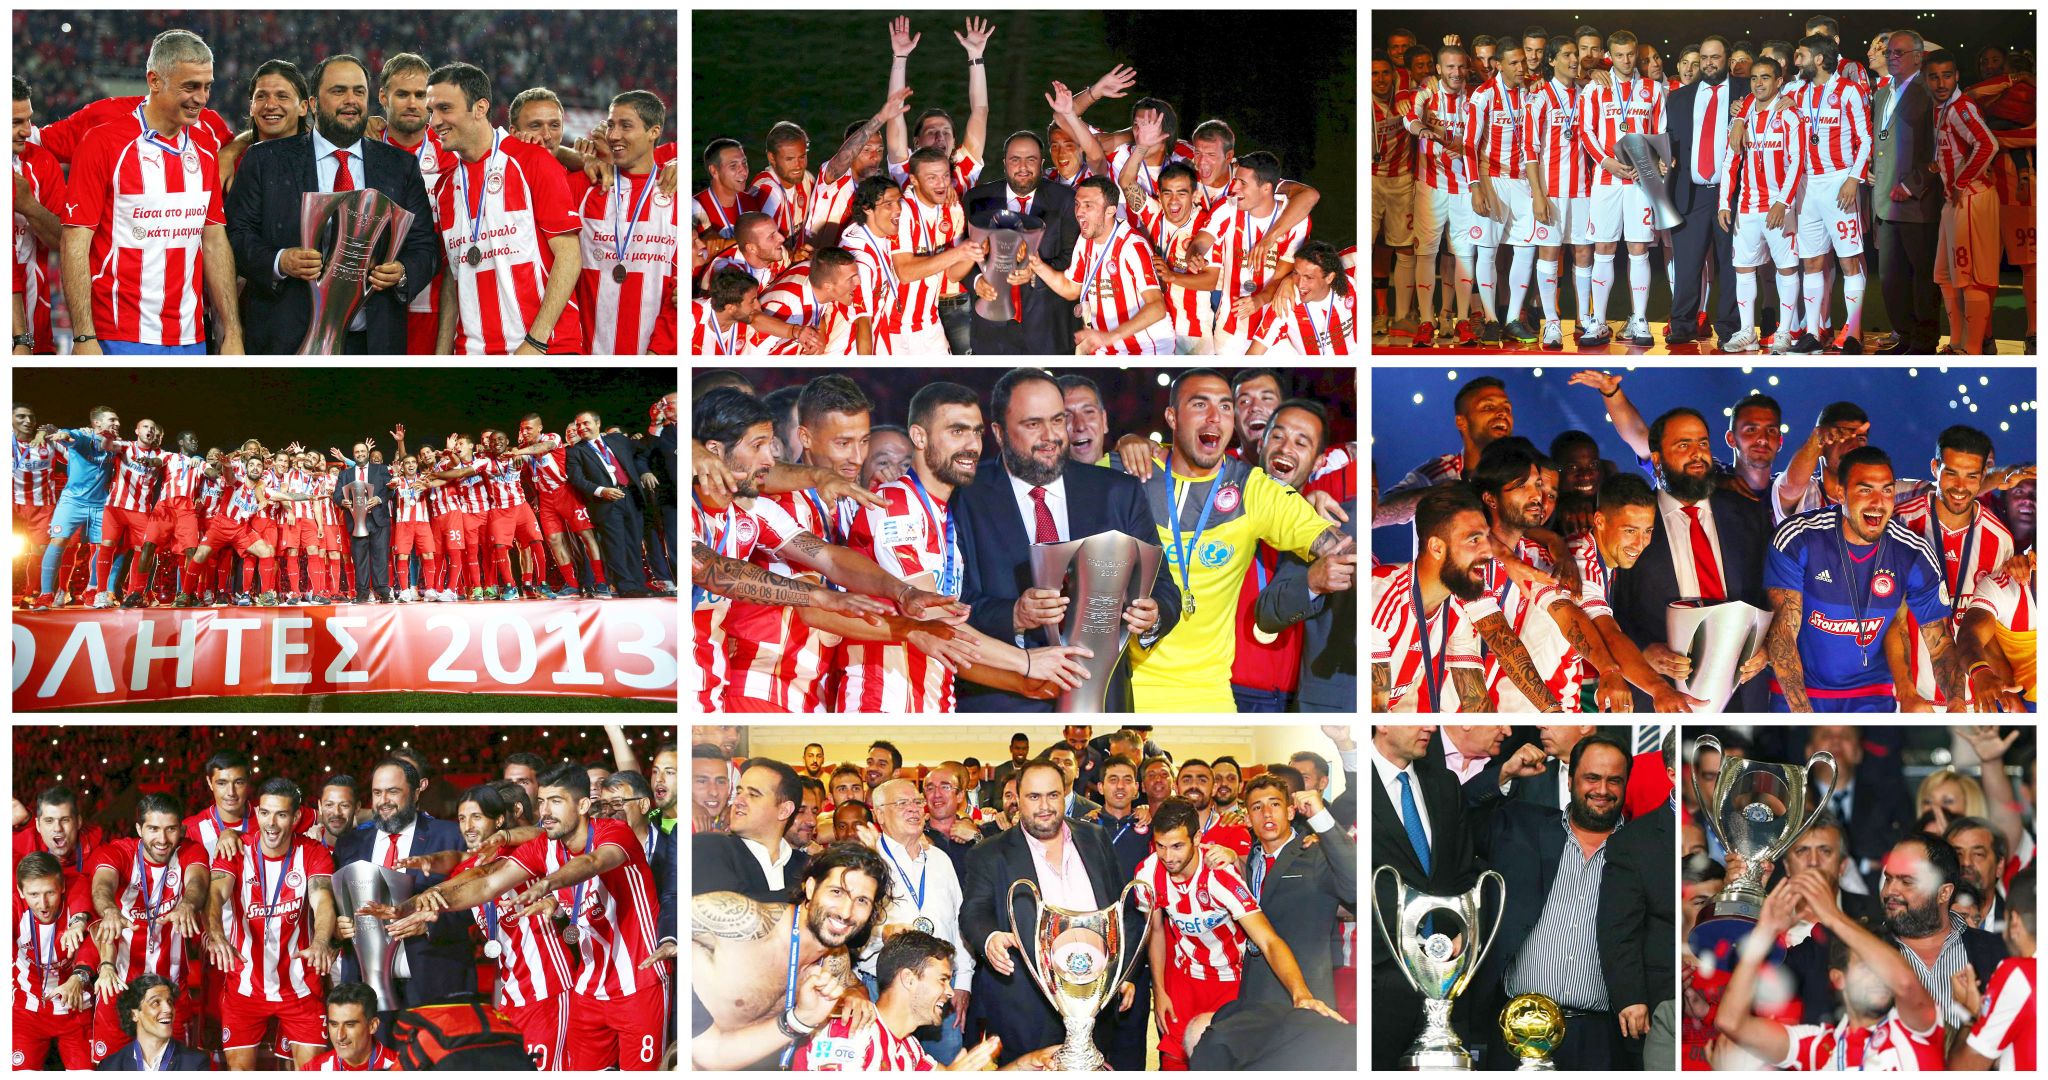 9 years of Olympiacos soaring to legendary heights